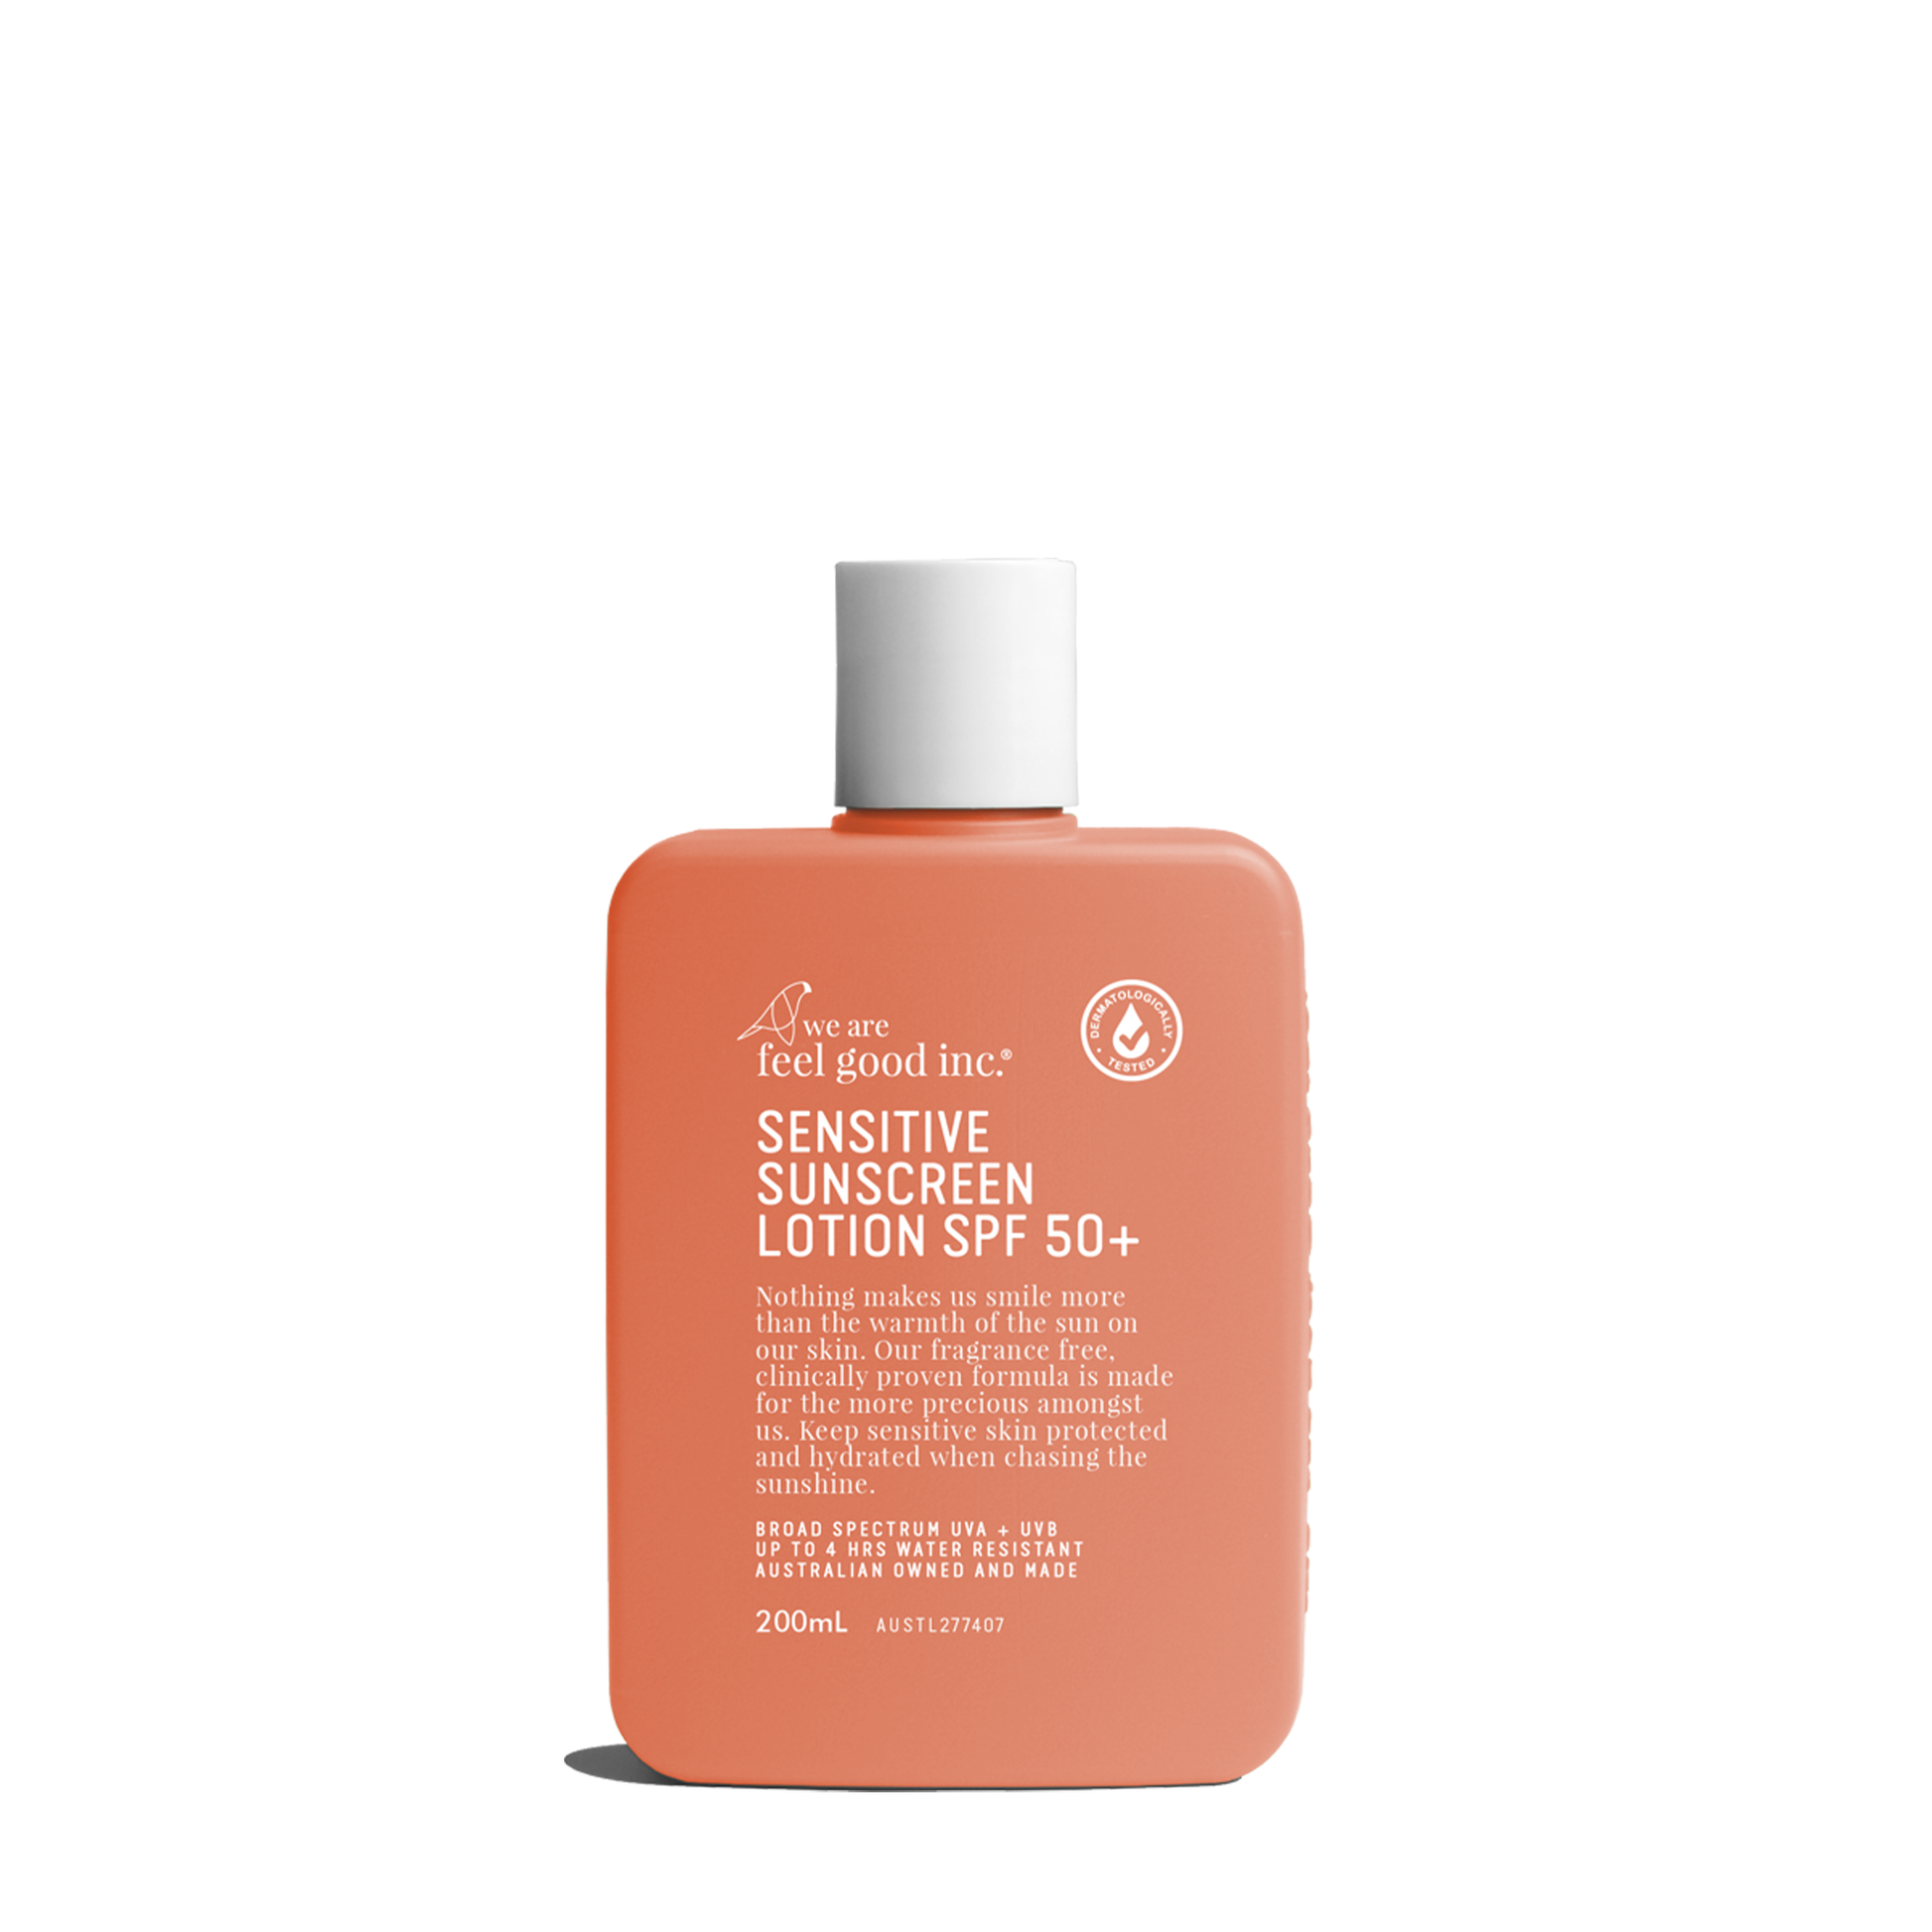 A coral-colored plastic bottle of We Are Feel Good Inc. Sensitive Sunscreen Lotion SPF 50+, 200ml, with a white cap